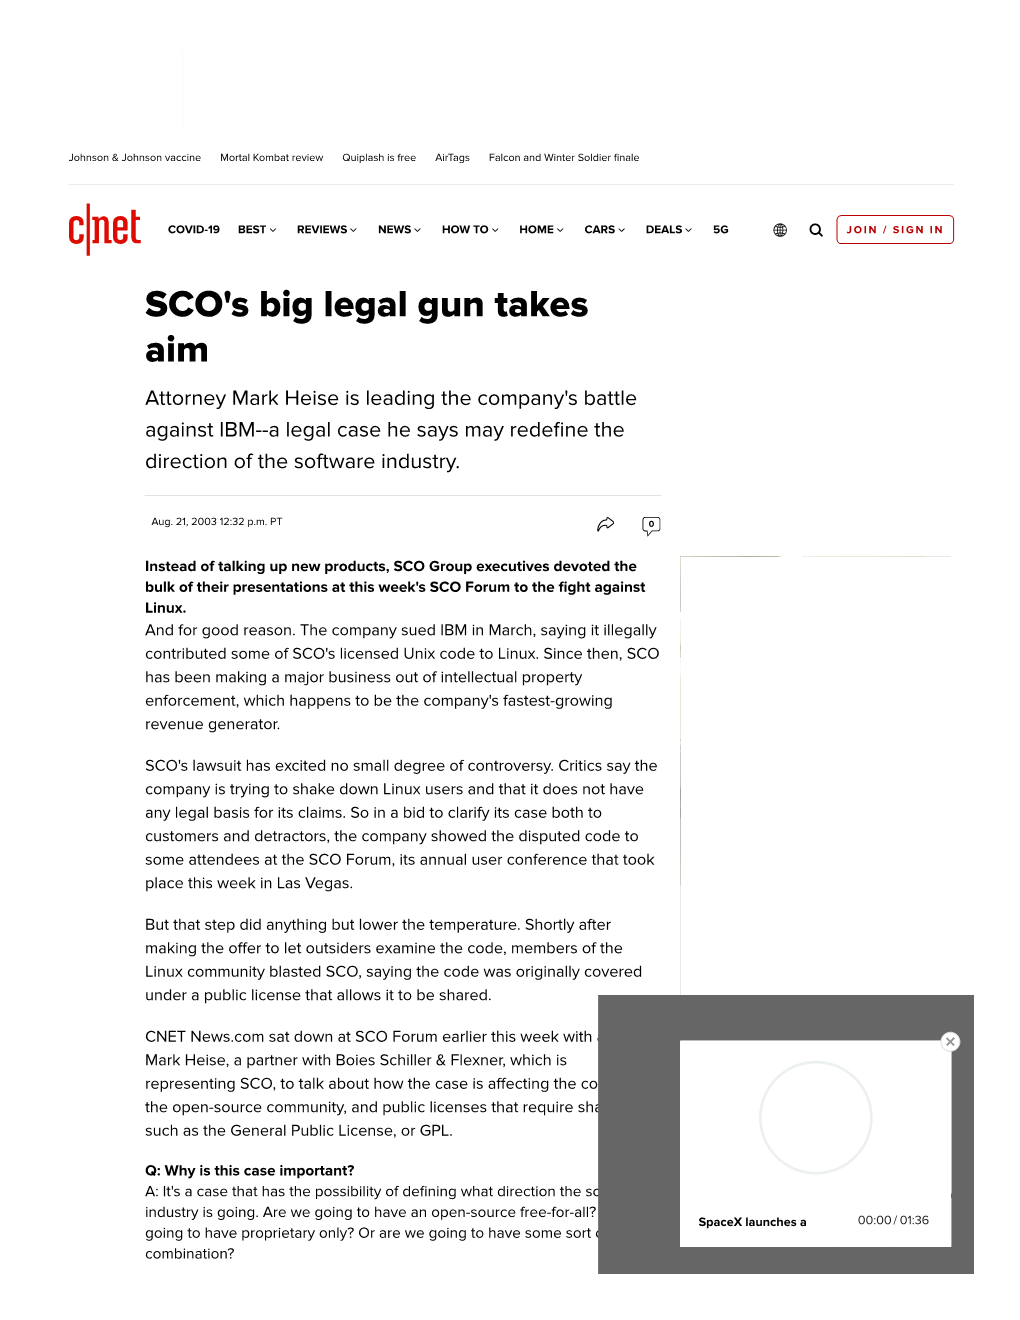 SCO's Big Legal Gun Takes Aim Attorney Mark Heise Is Leading the Company's Battle Against IBM--A Legal Case He Says May Redeﬁne the Direction of the Software Industry